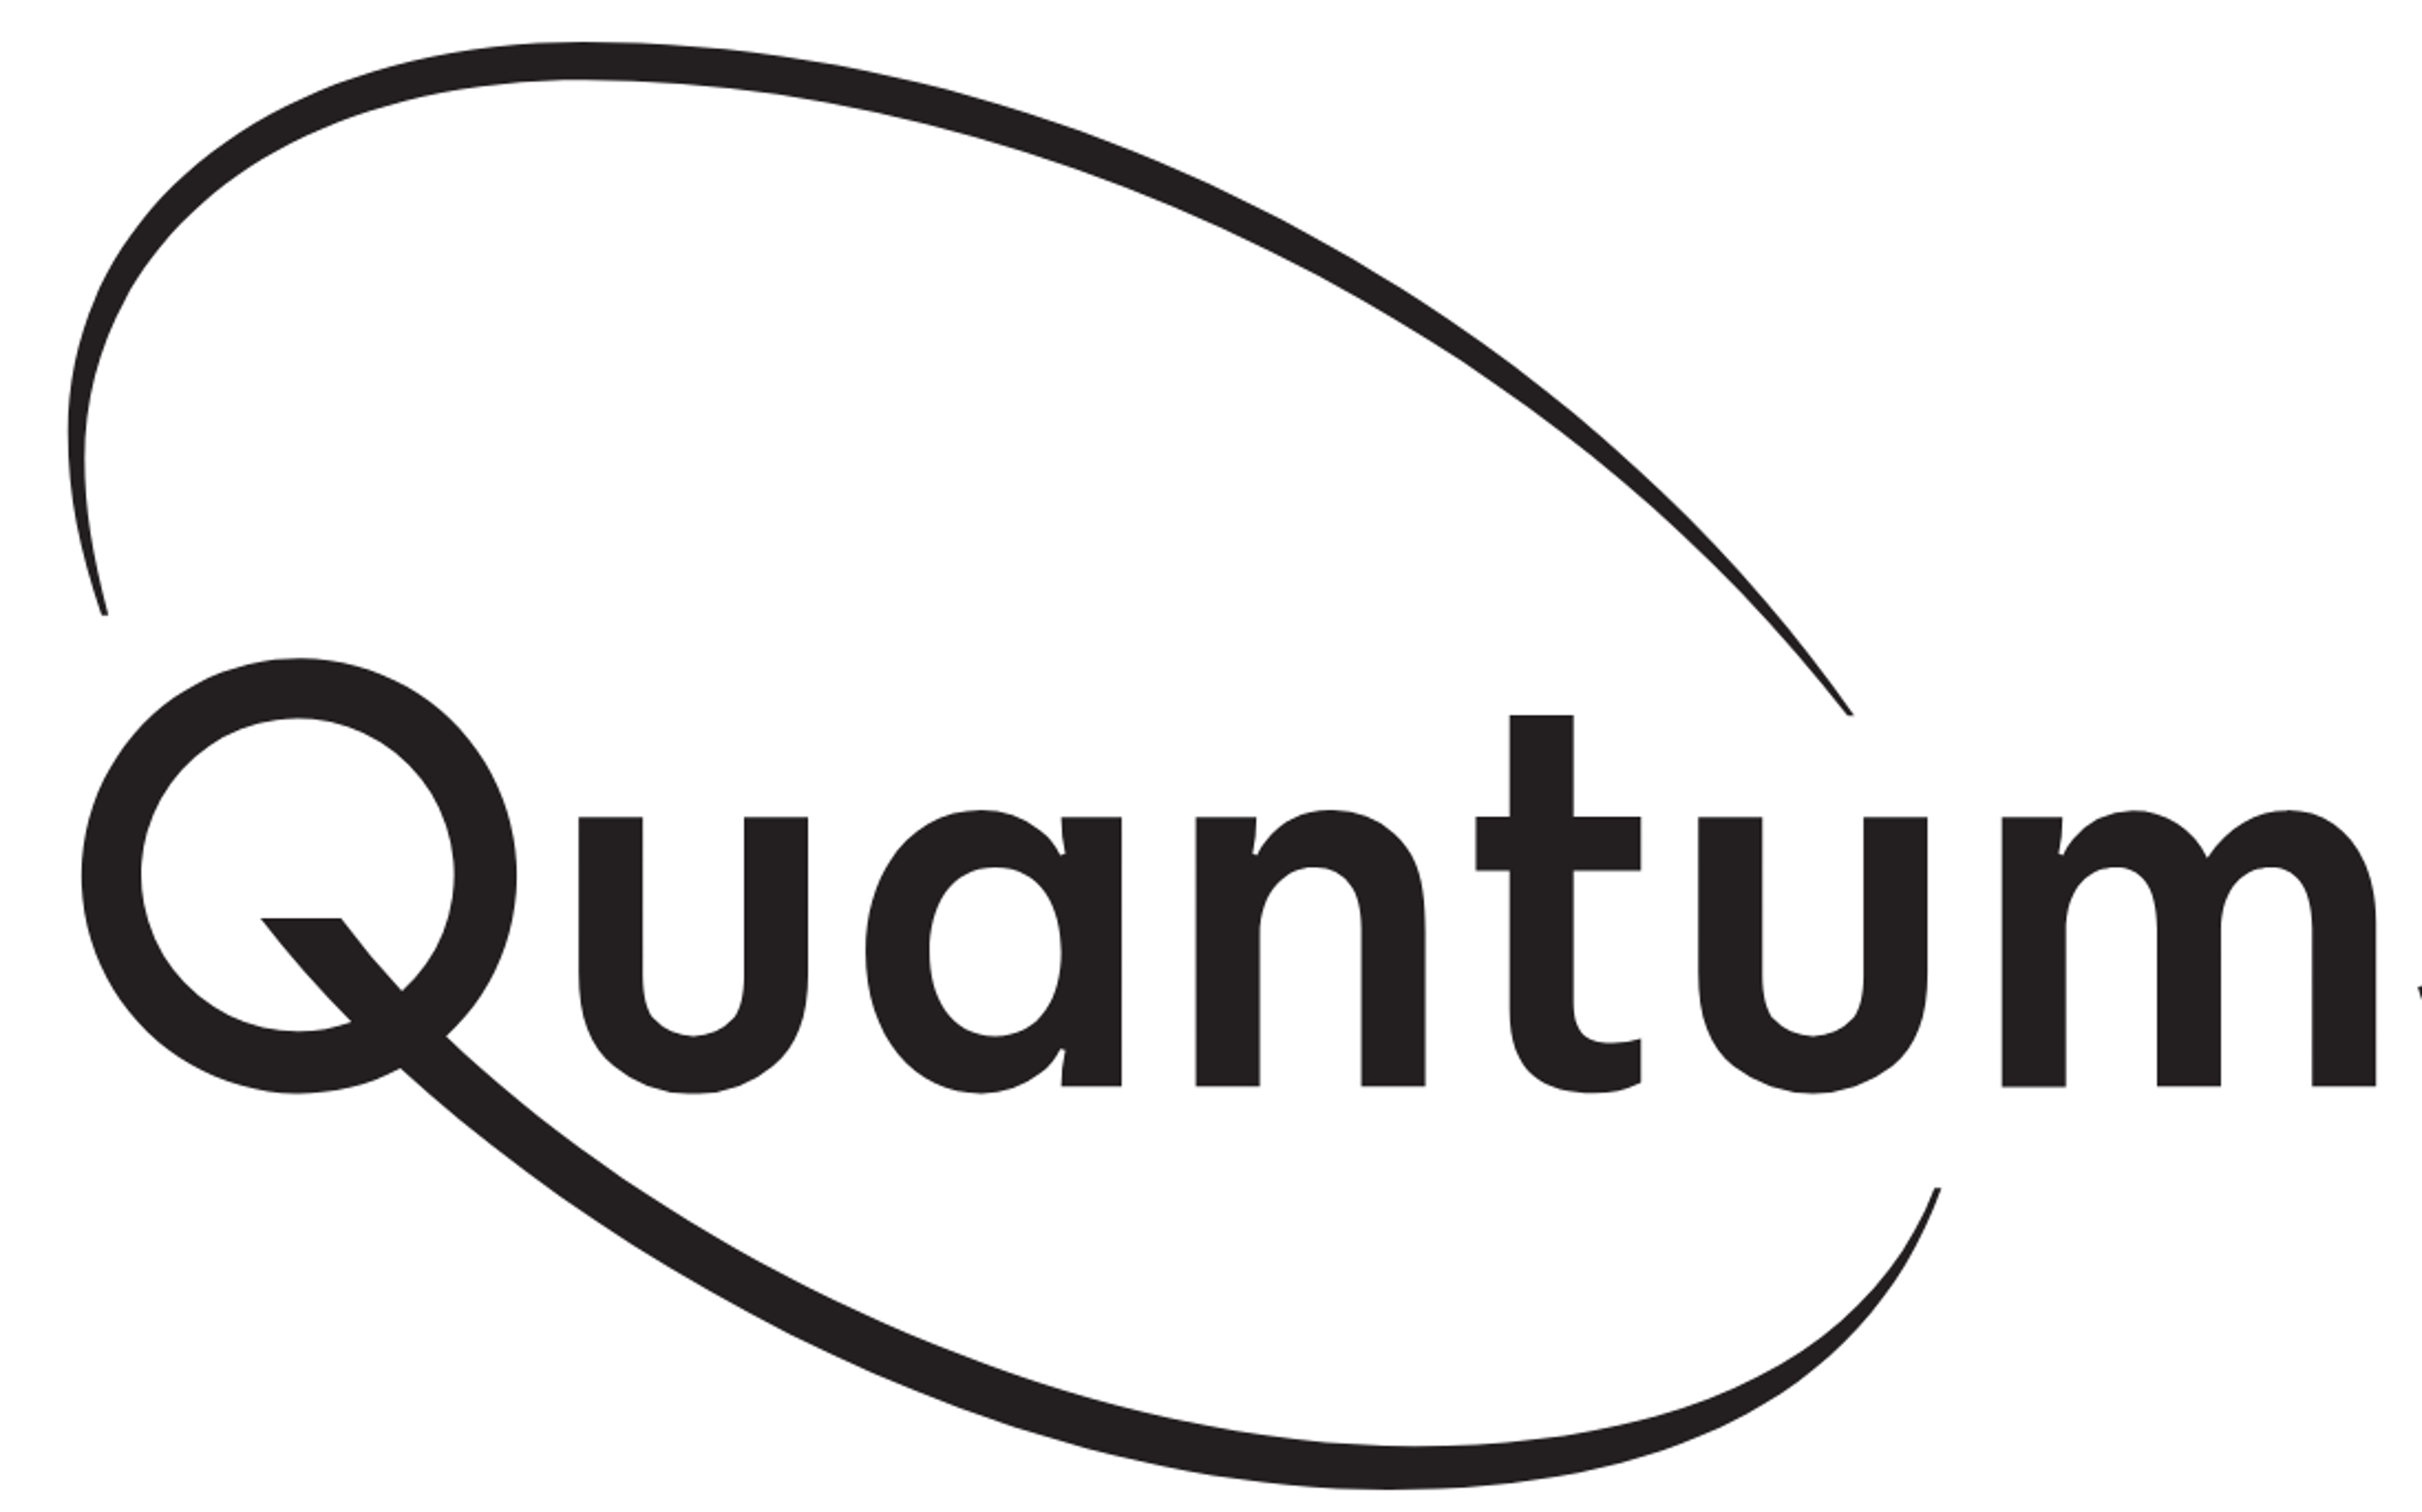 Bill Gates And Volkswagen-Backed EV Battery Maker QuantumScape Going Public Via SPAC